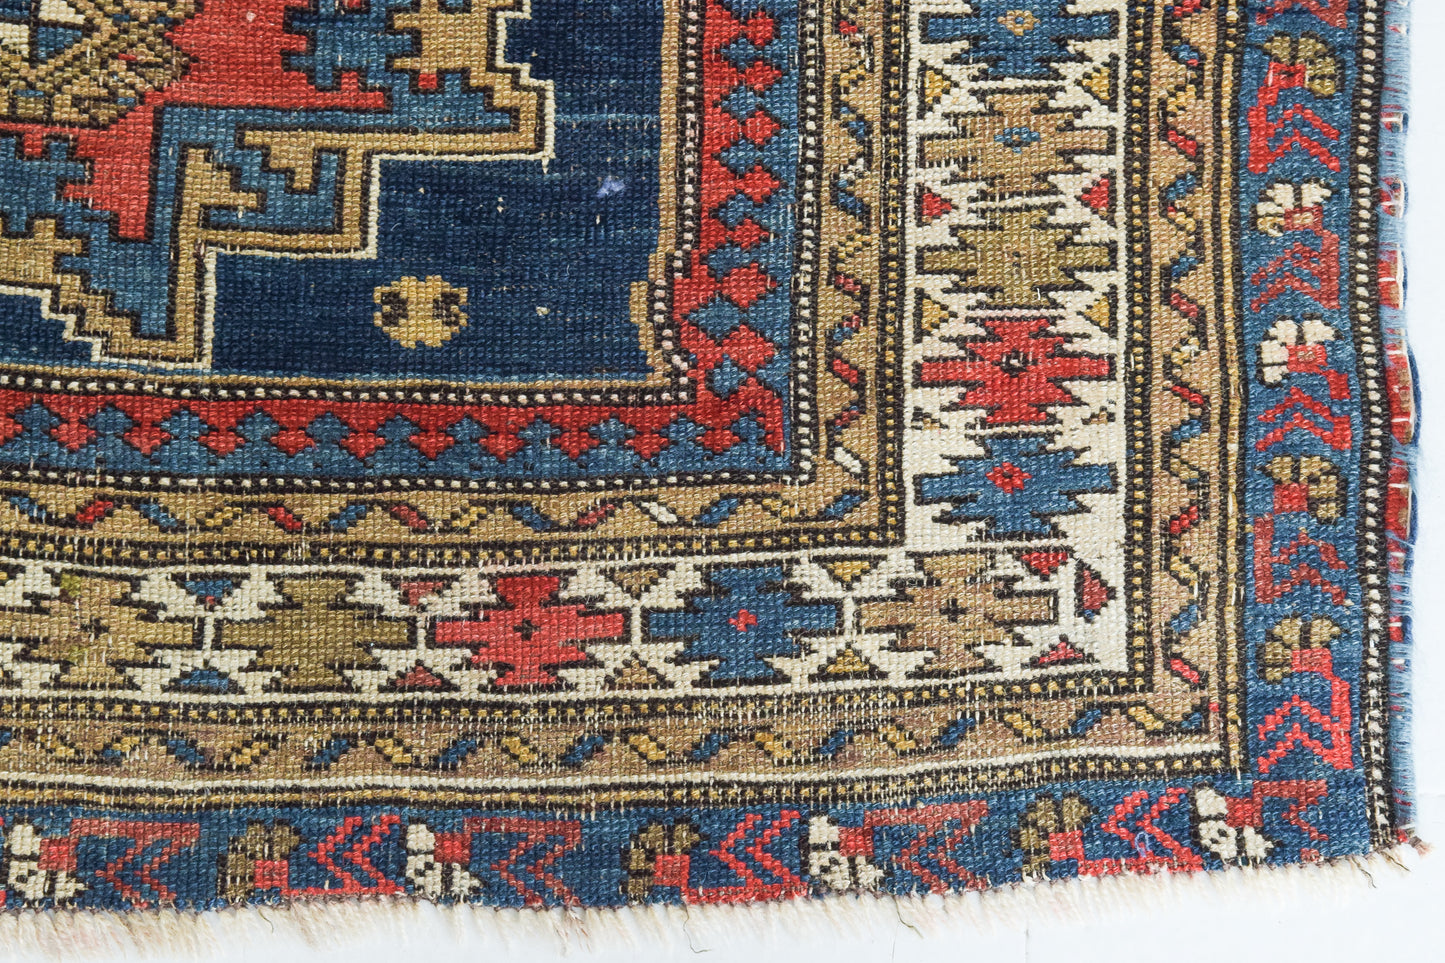 Handwoven - Blue Ground Persian Rug with Bird-like Figures